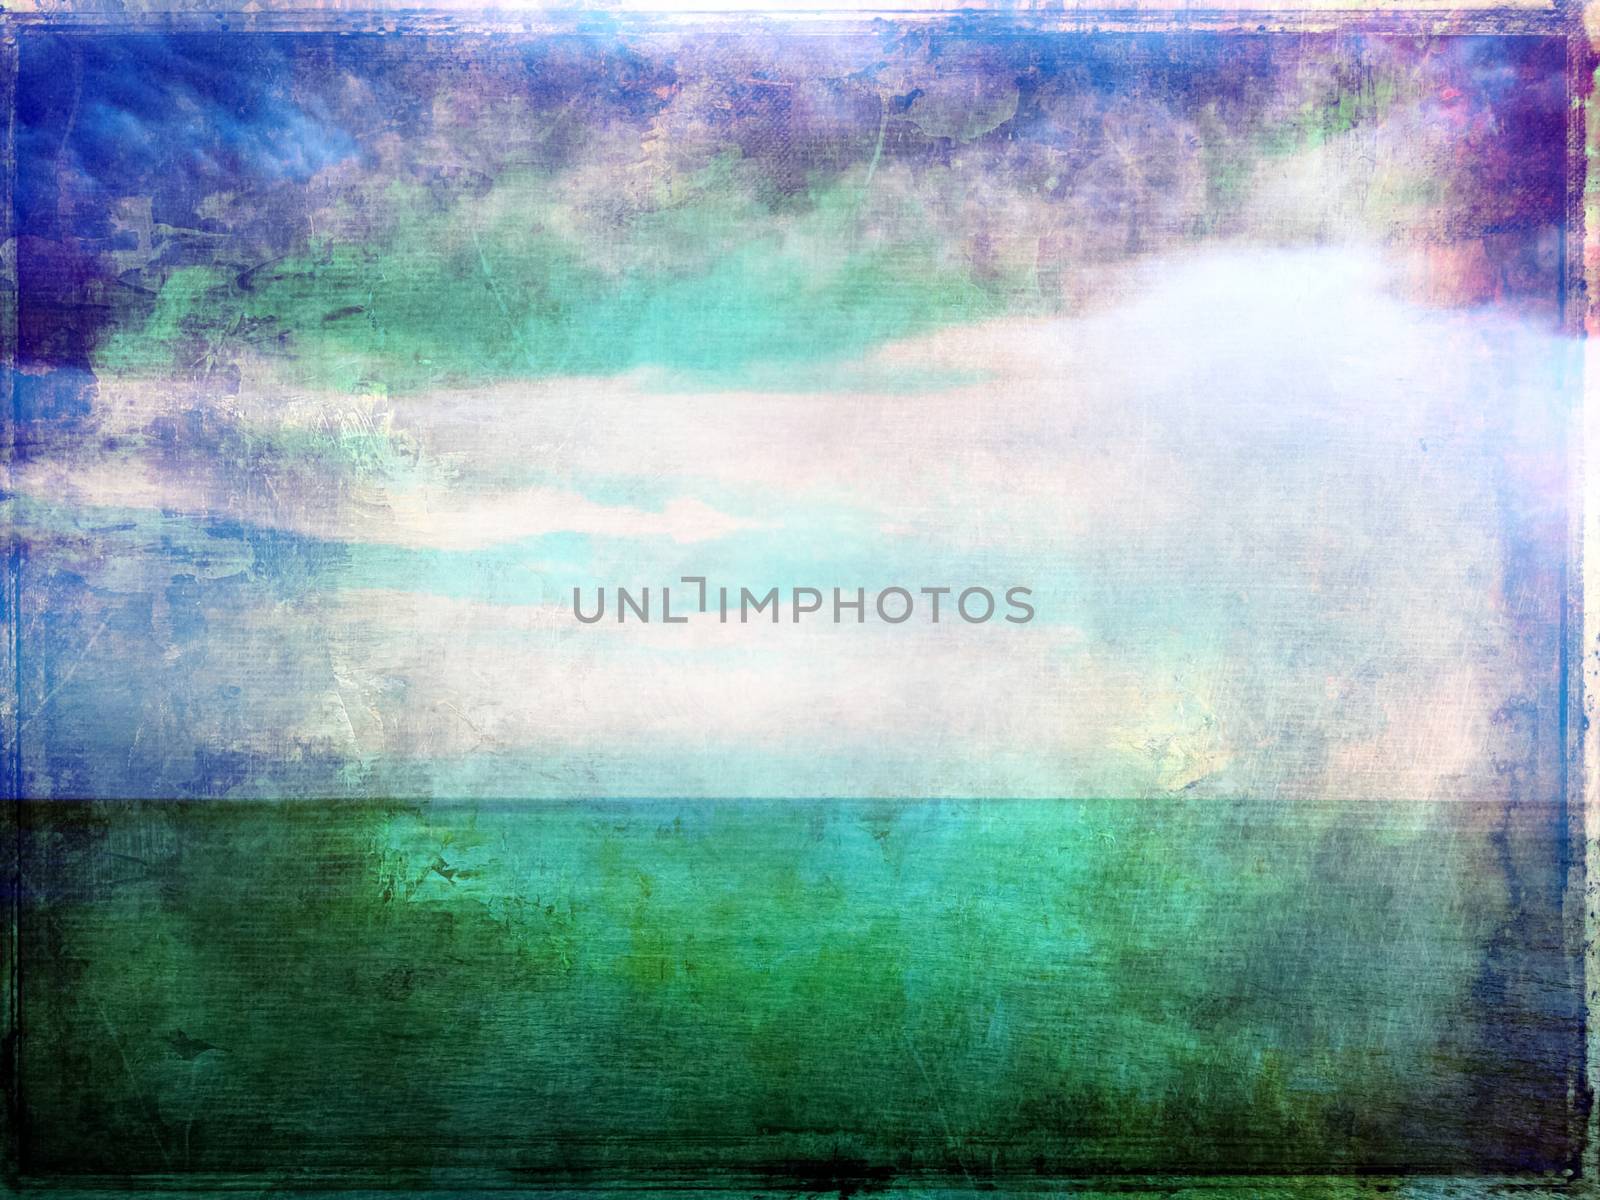 Abstract vibrant image of sea and sky. Canvas texture.